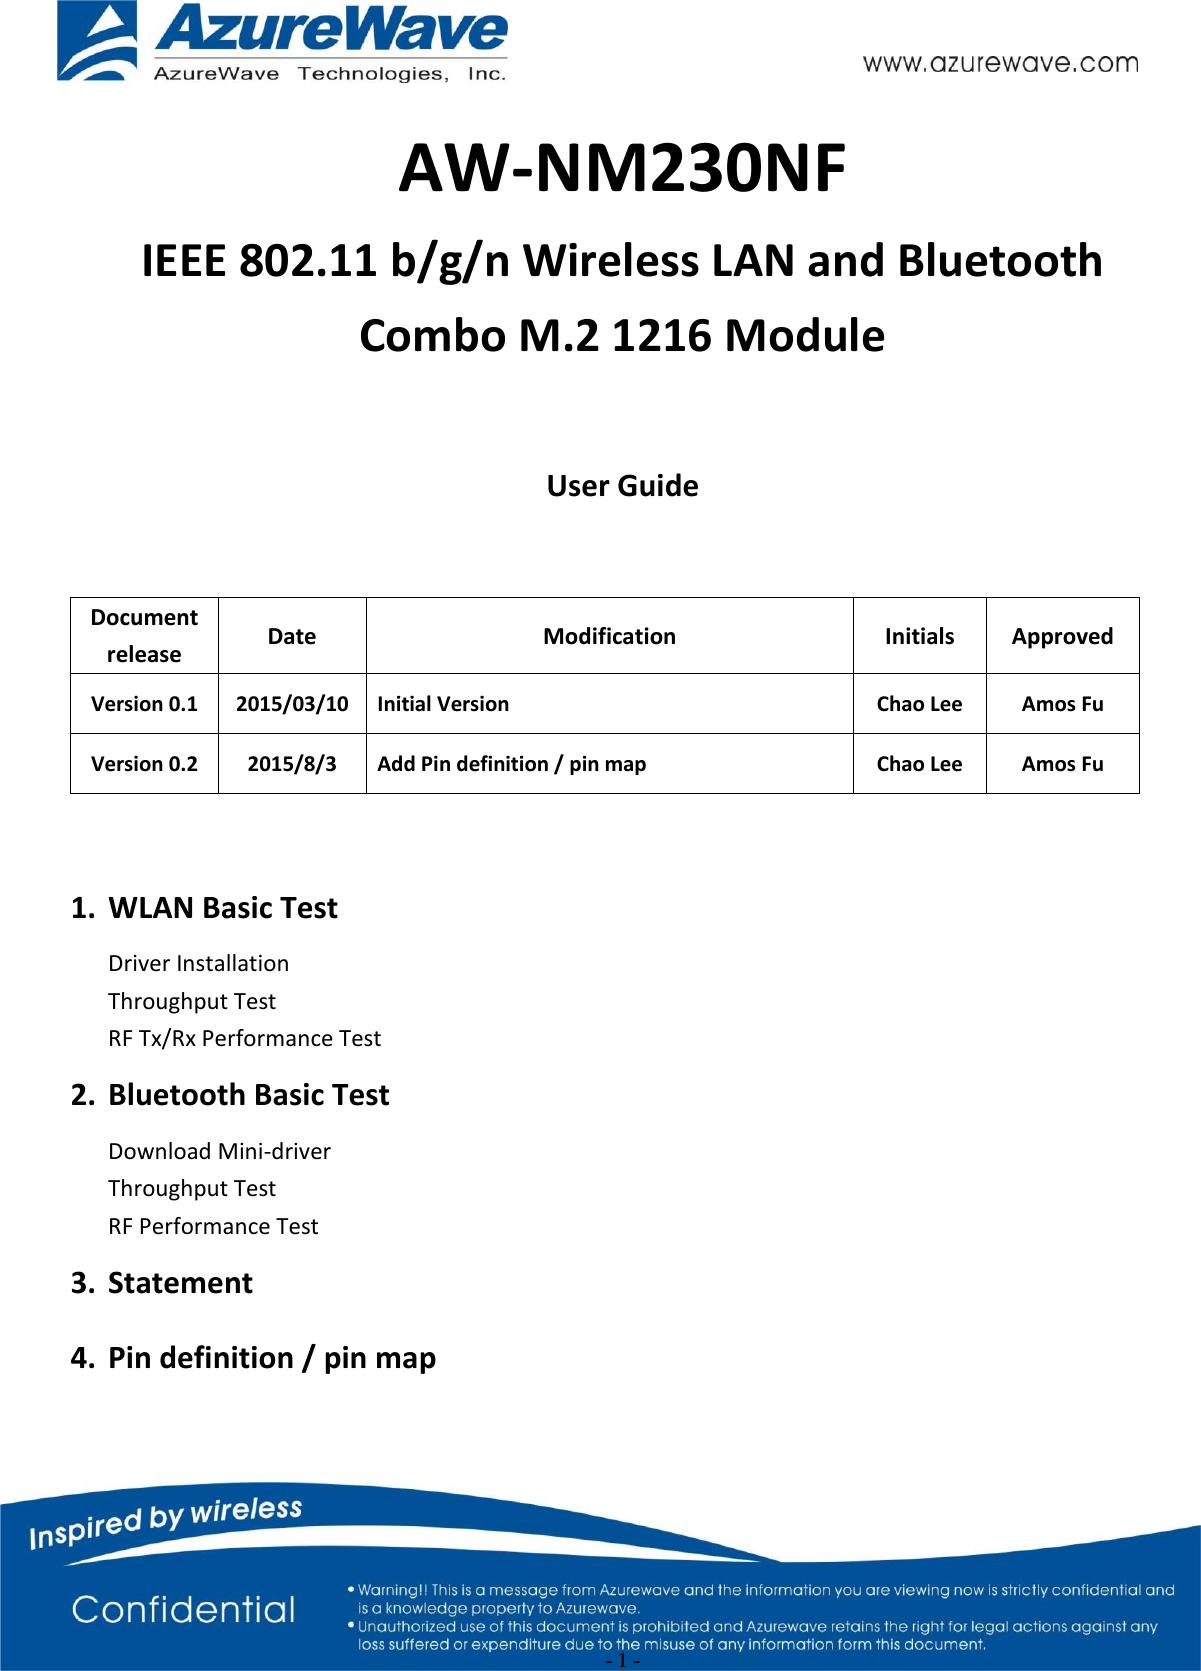  - 1 - AW-NM230NF IEEE 802.11 b/g/n Wireless LAN and Bluetooth Combo M.2 1216 Module  User Guide  Document release Date Modification Initials Approved Version 0.1 2015/03/10 Initial Version Chao Lee Amos Fu Version 0.2 2015/8/3 Add Pin definition / pin map Chao Lee Amos Fu  1. WLAN Basic Test  Driver Installation  Throughput Test  RF Tx/Rx Performance Test 2. Bluetooth Basic Test  Download Mini-driver  Throughput Test  RF Performance Test 3. Statement 4. Pin definition / pin map 